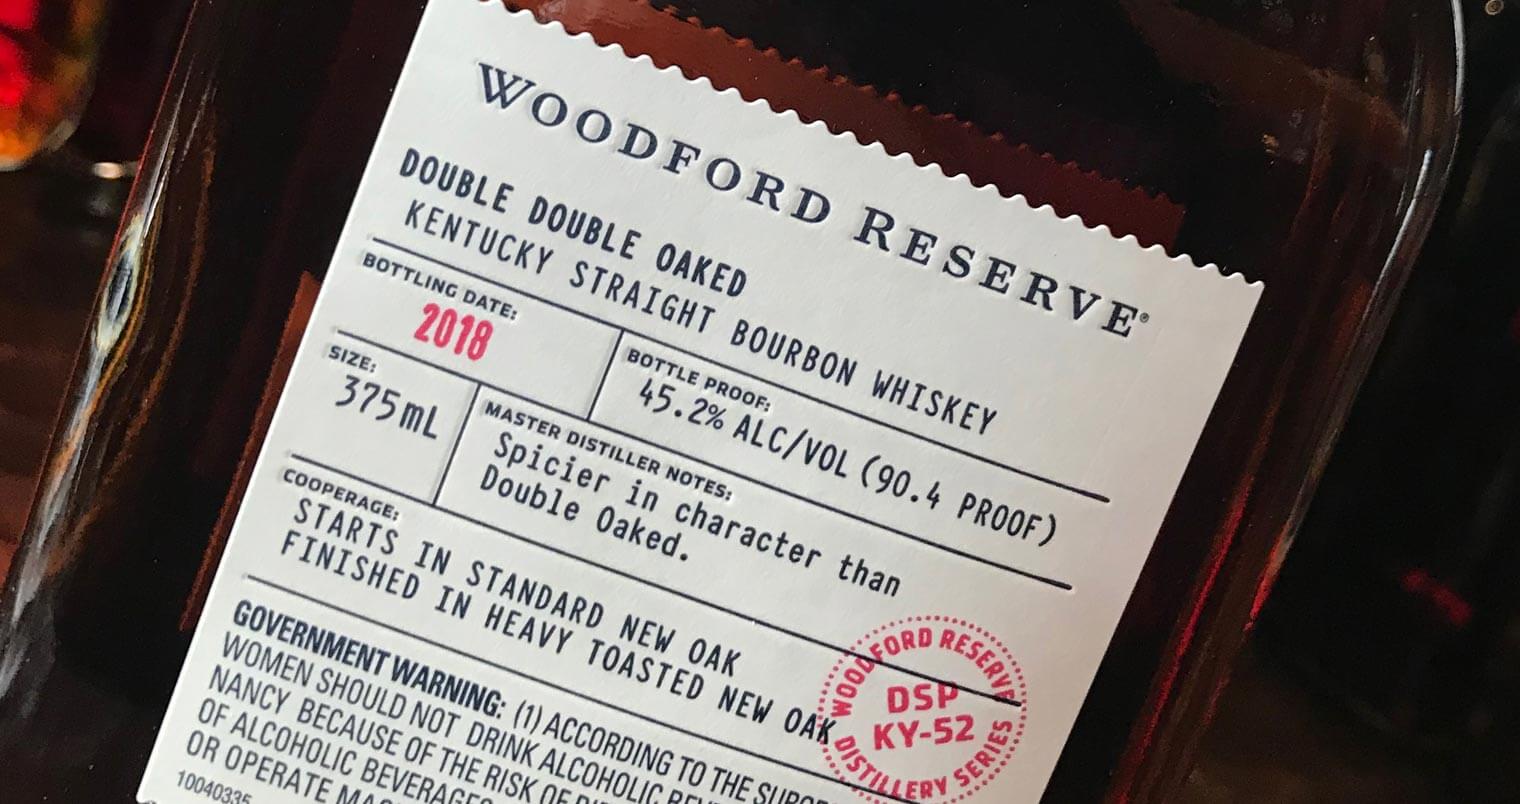 Woodford Reserve Double Double Oaked, bottle label, featured image